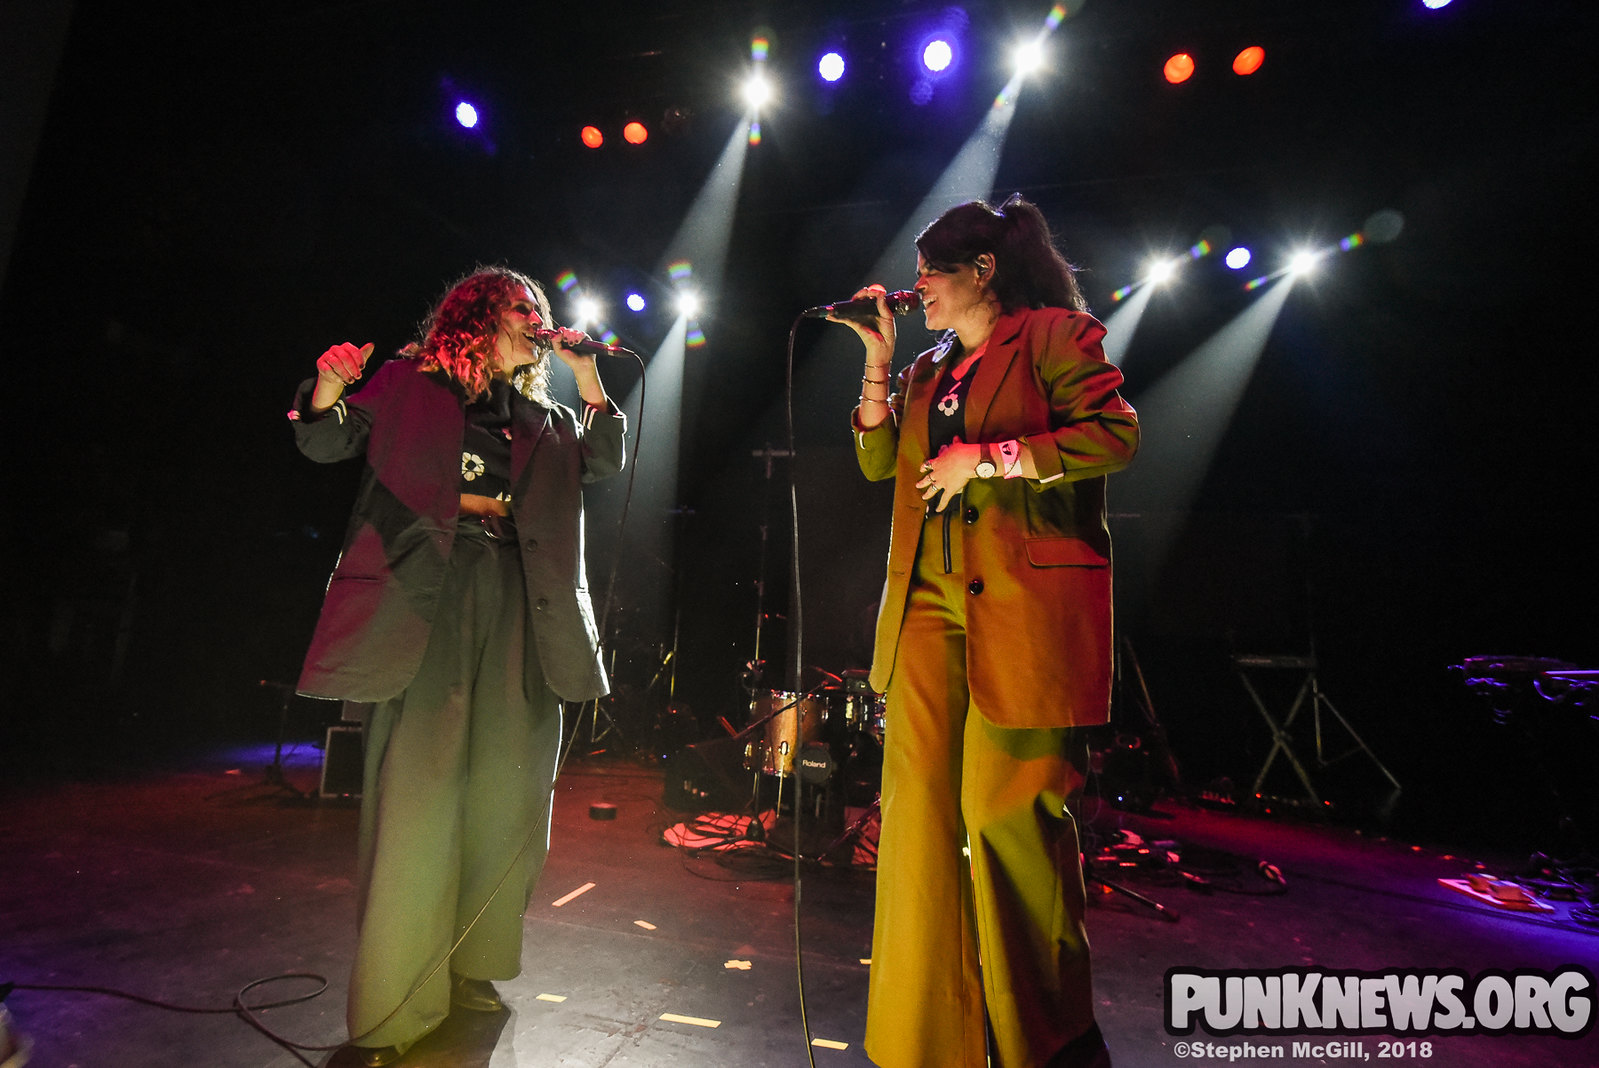 Overcoats at The Danforth Music Hall, 10/22